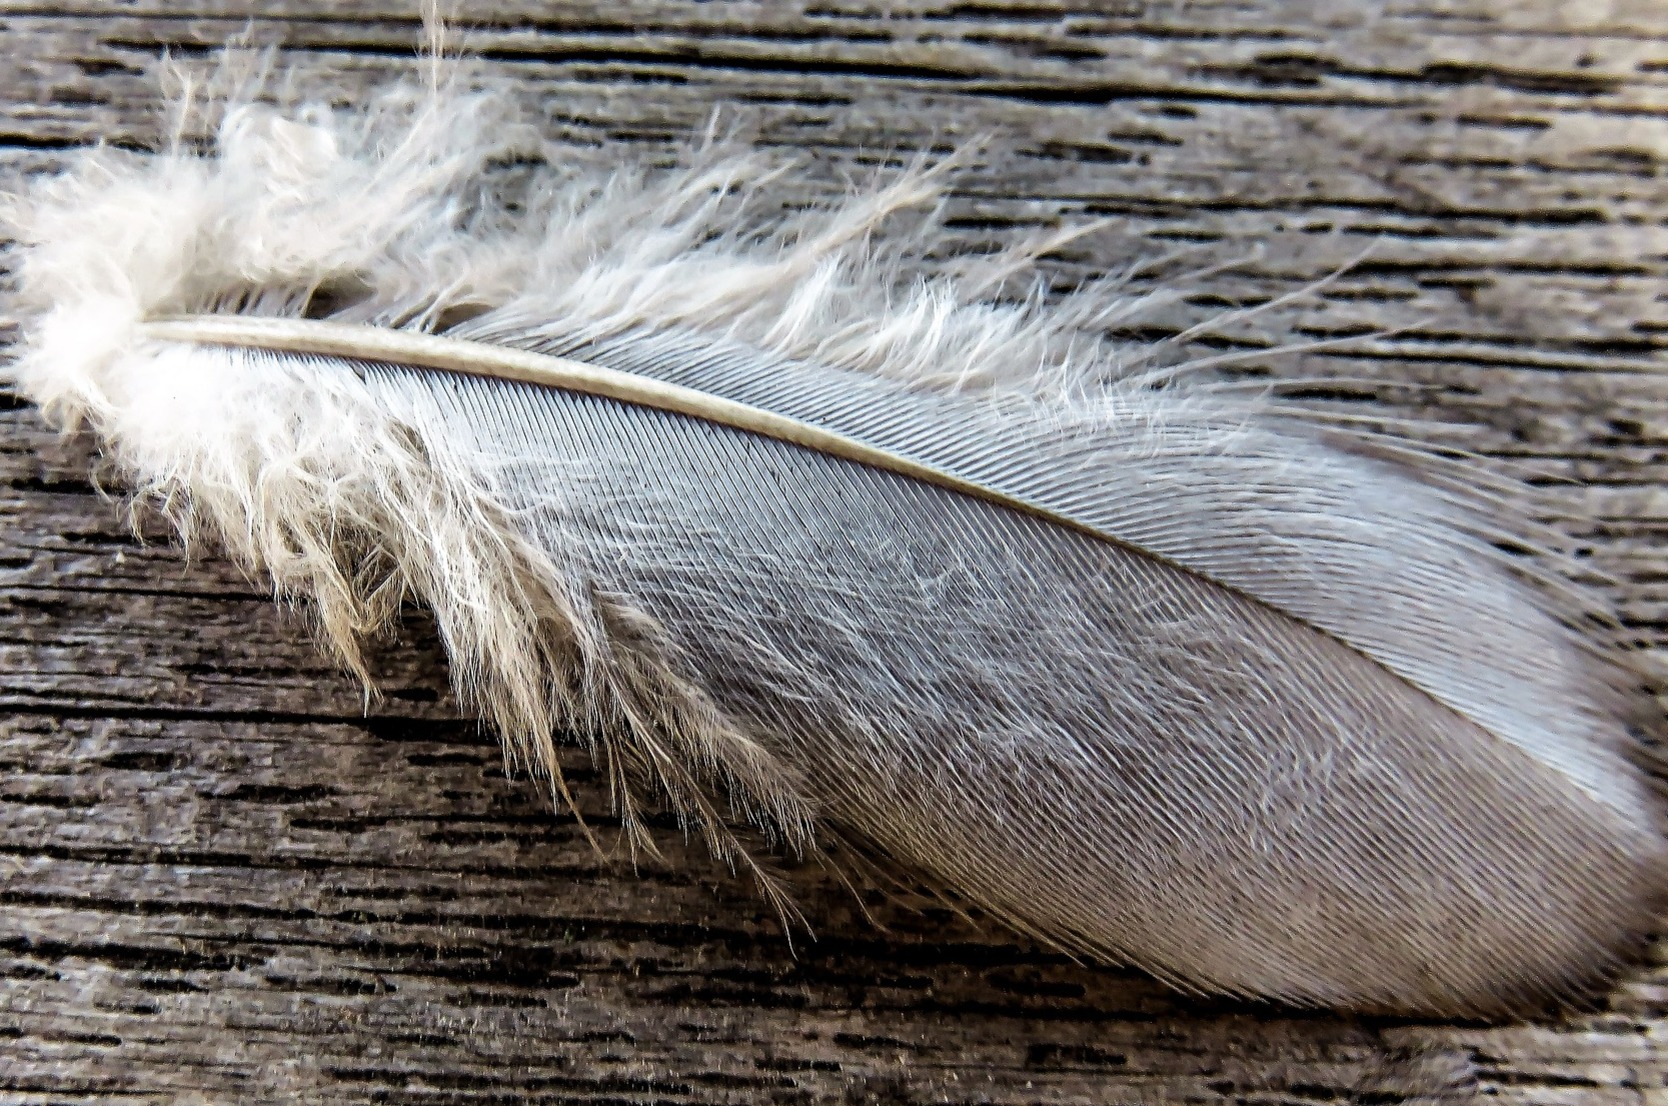 Birds develop feathers the same way we develop hair and teeth